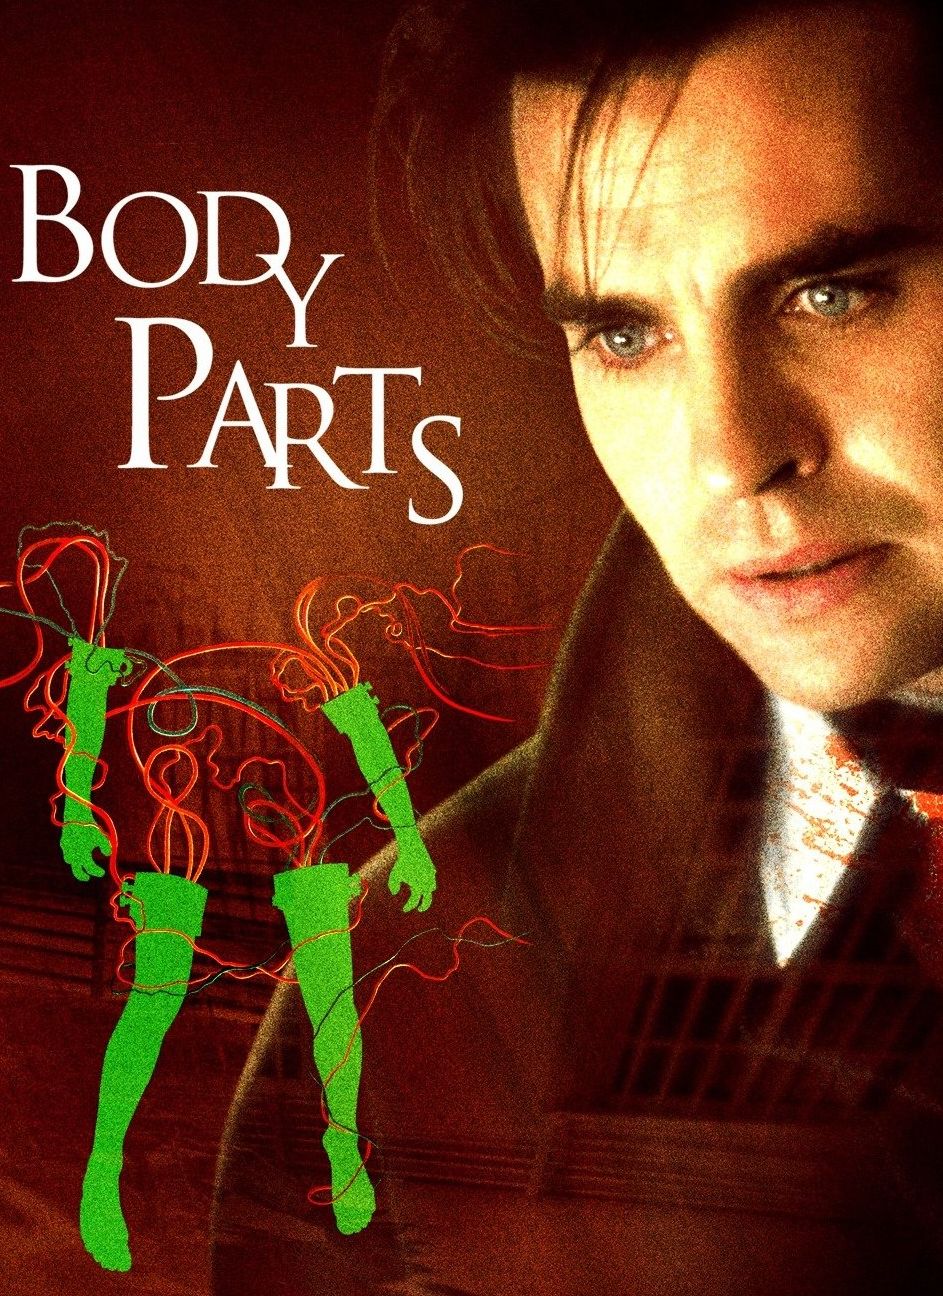 A medical miracle has become a murderous nightmare -Body Parts (1991)